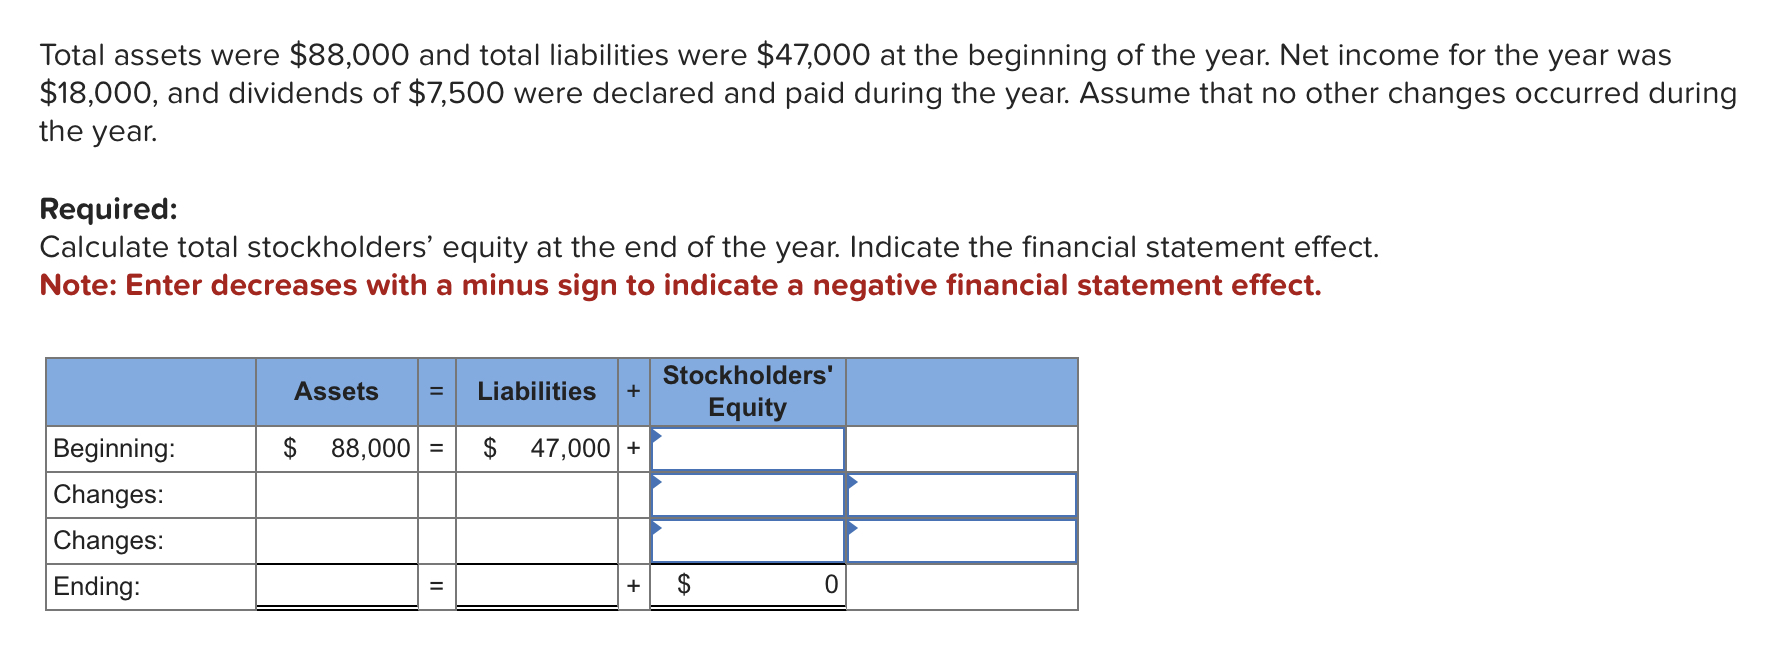 Total assets were $88,000 and total liabilities were $47,000 at the beginning of the year. Net income for the